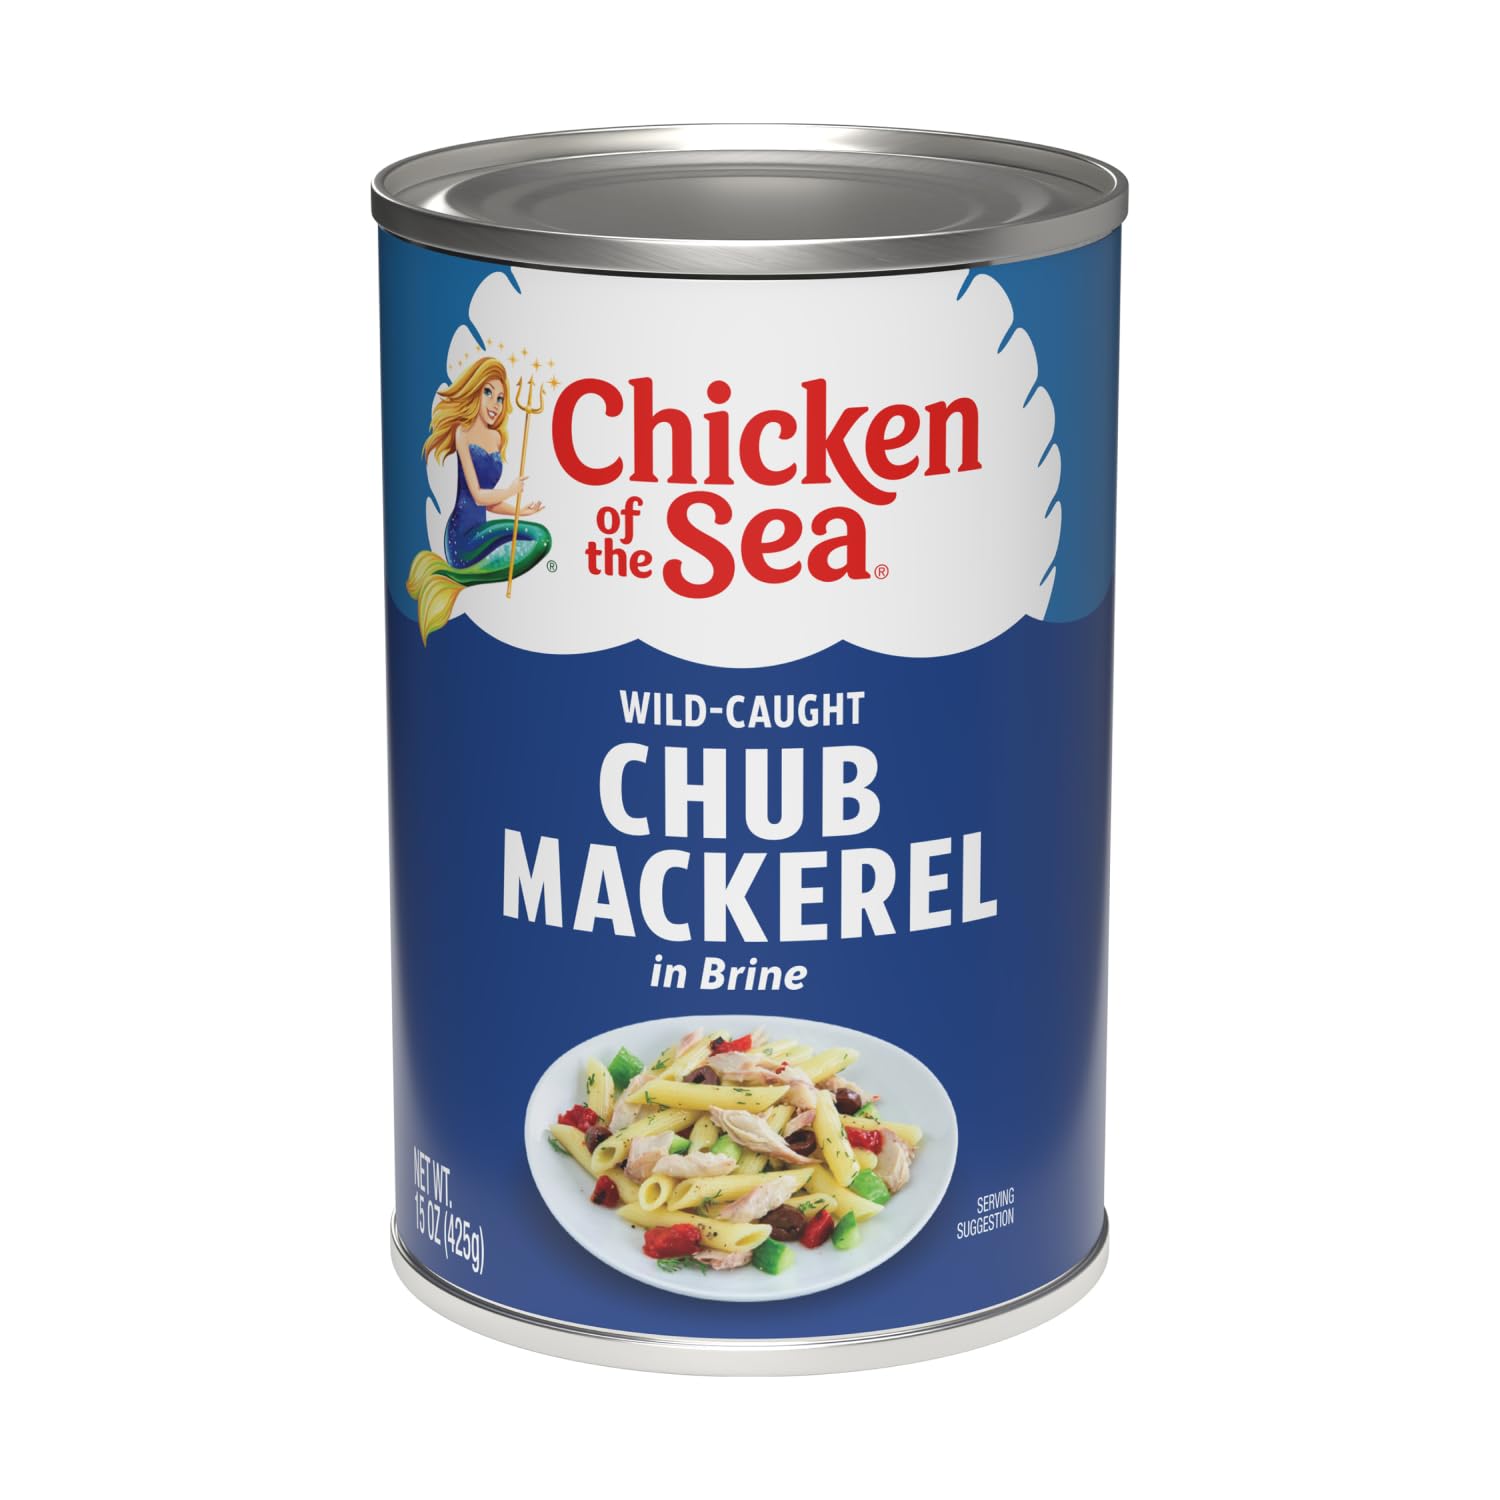 Chicken of the Sea Chub Mackerel Wild Caught, High in Calcium, 15-Ounce Can (Pack of 1)